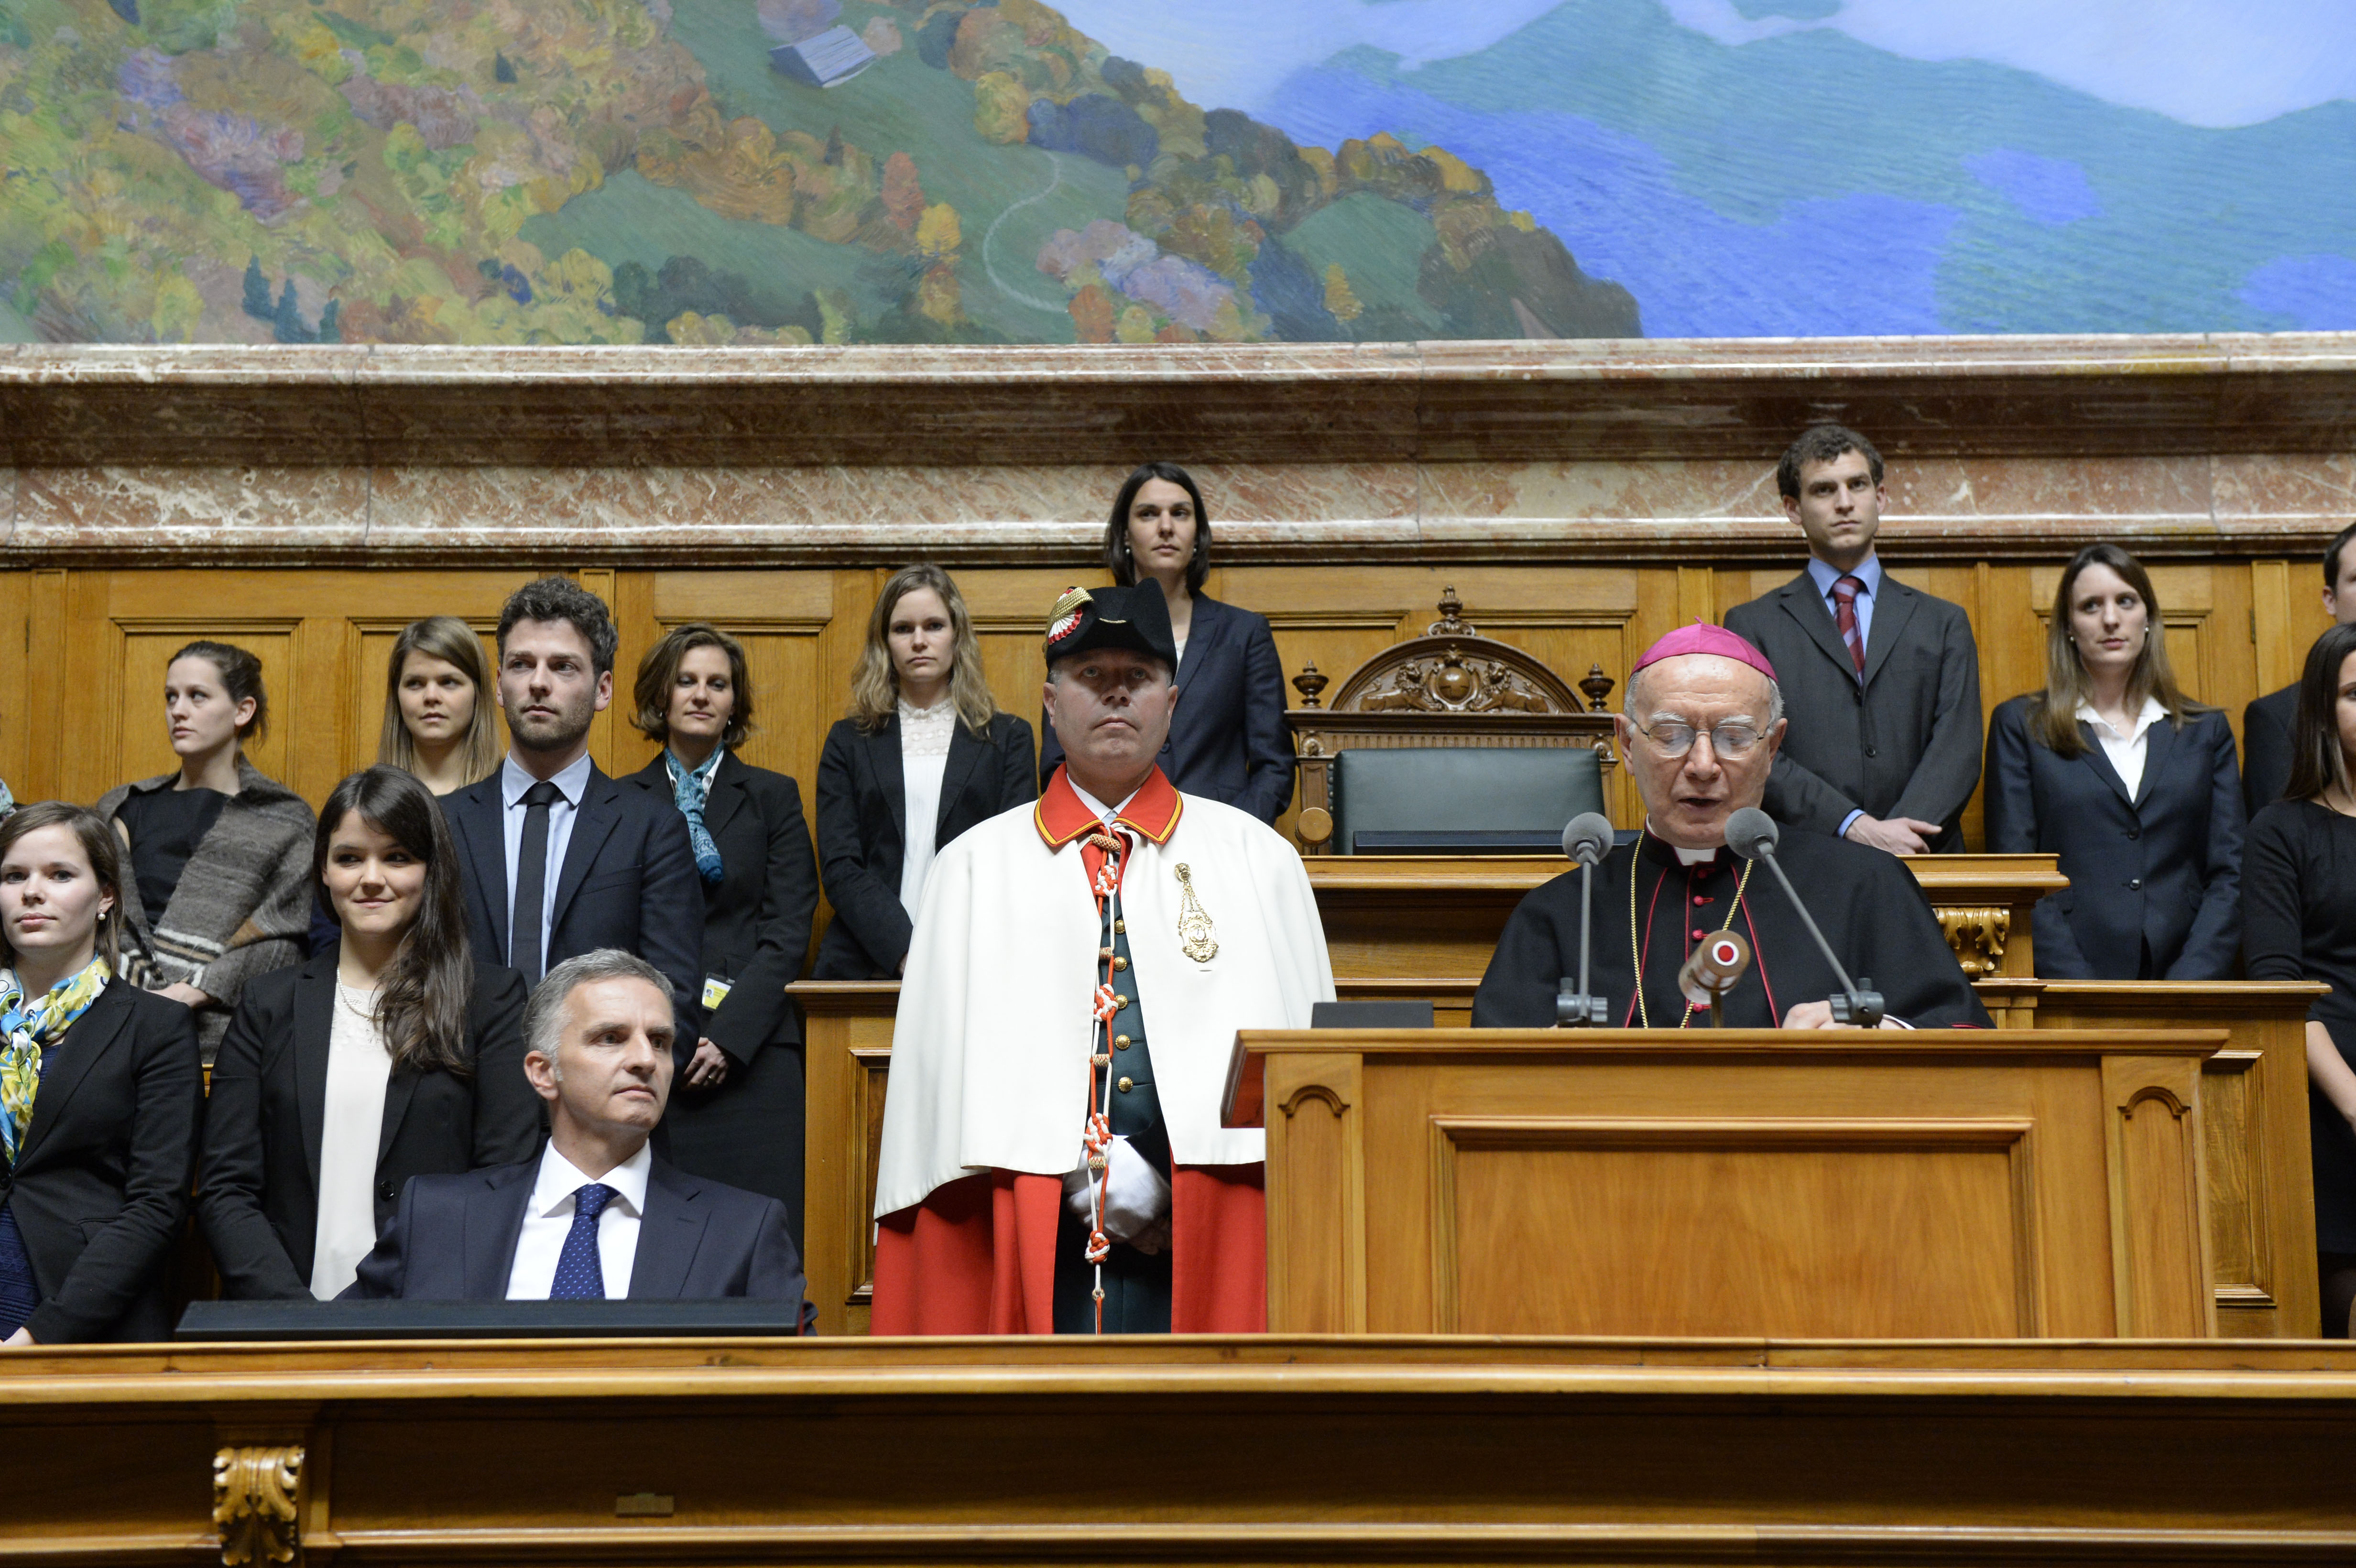 Surrounded by a group of young diplomats, the Apostolic Nuncio addresses the diplomatic corps.